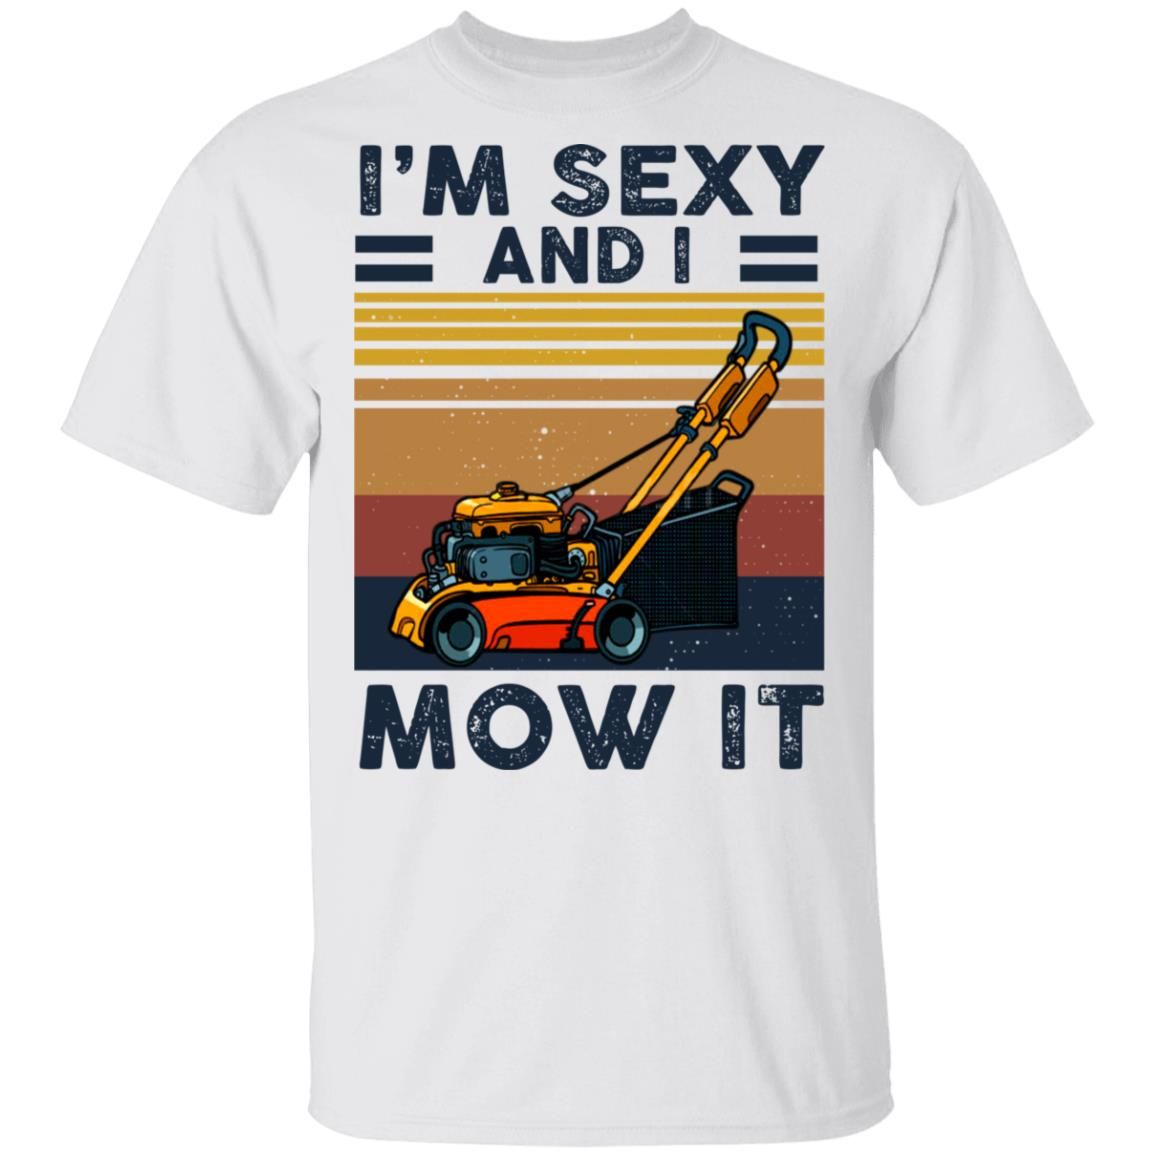 Im Sexy And I Mow It Vintage Shirt